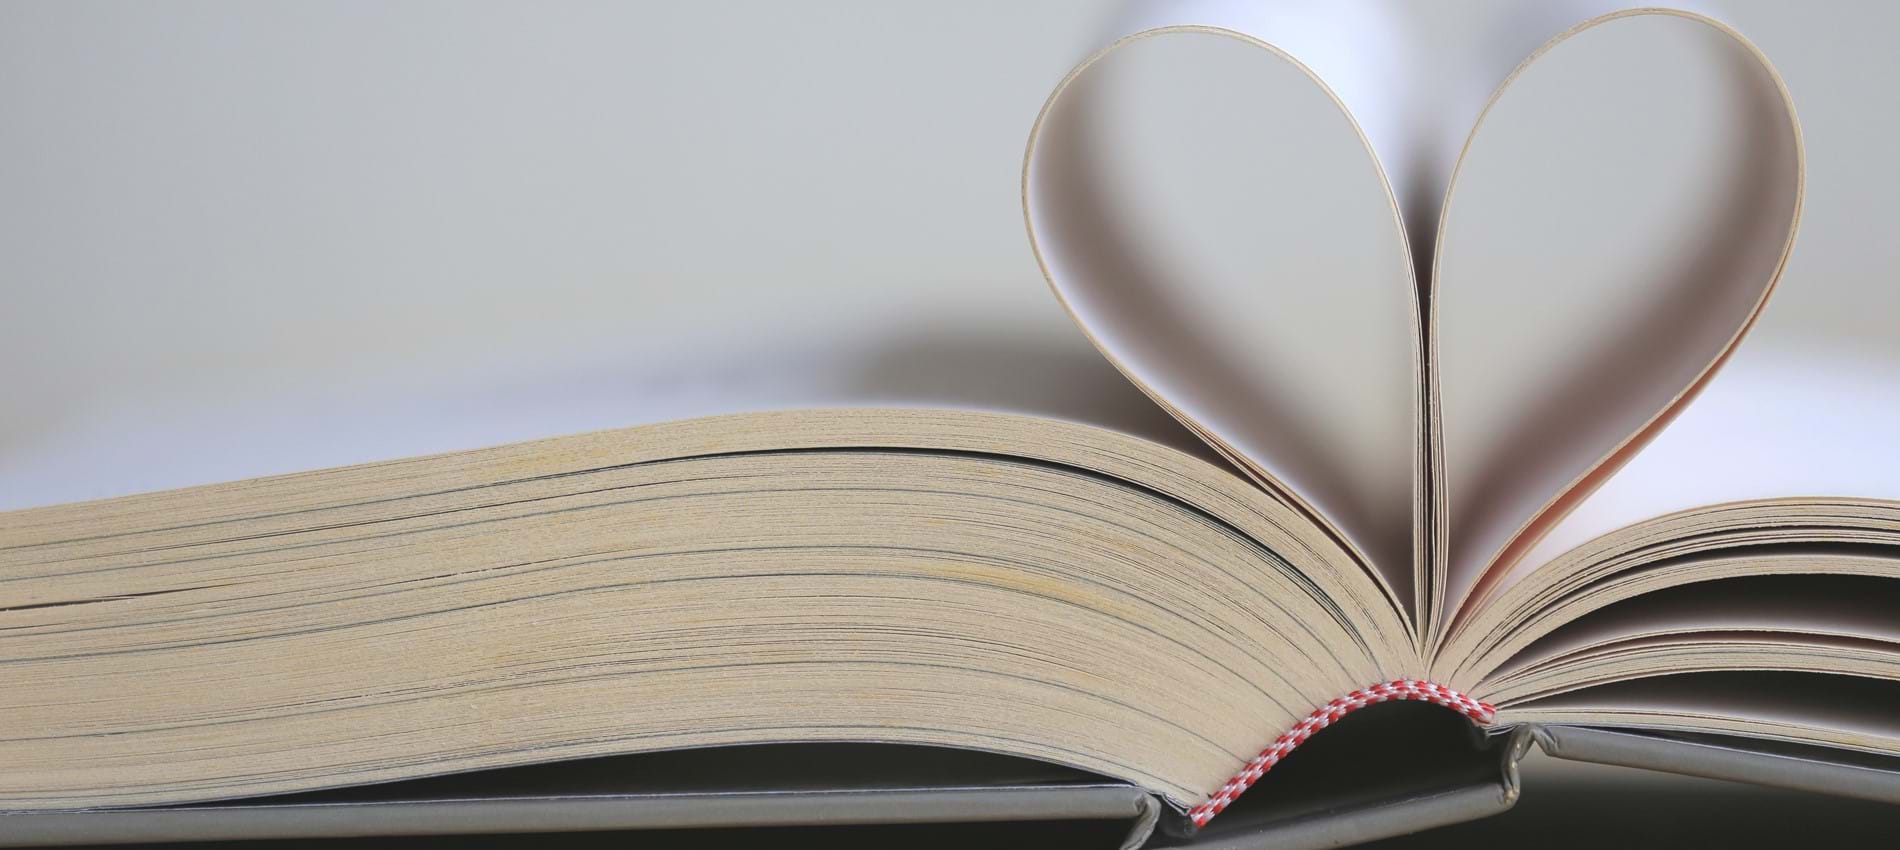 nojs Pages of a book folded into a heart.